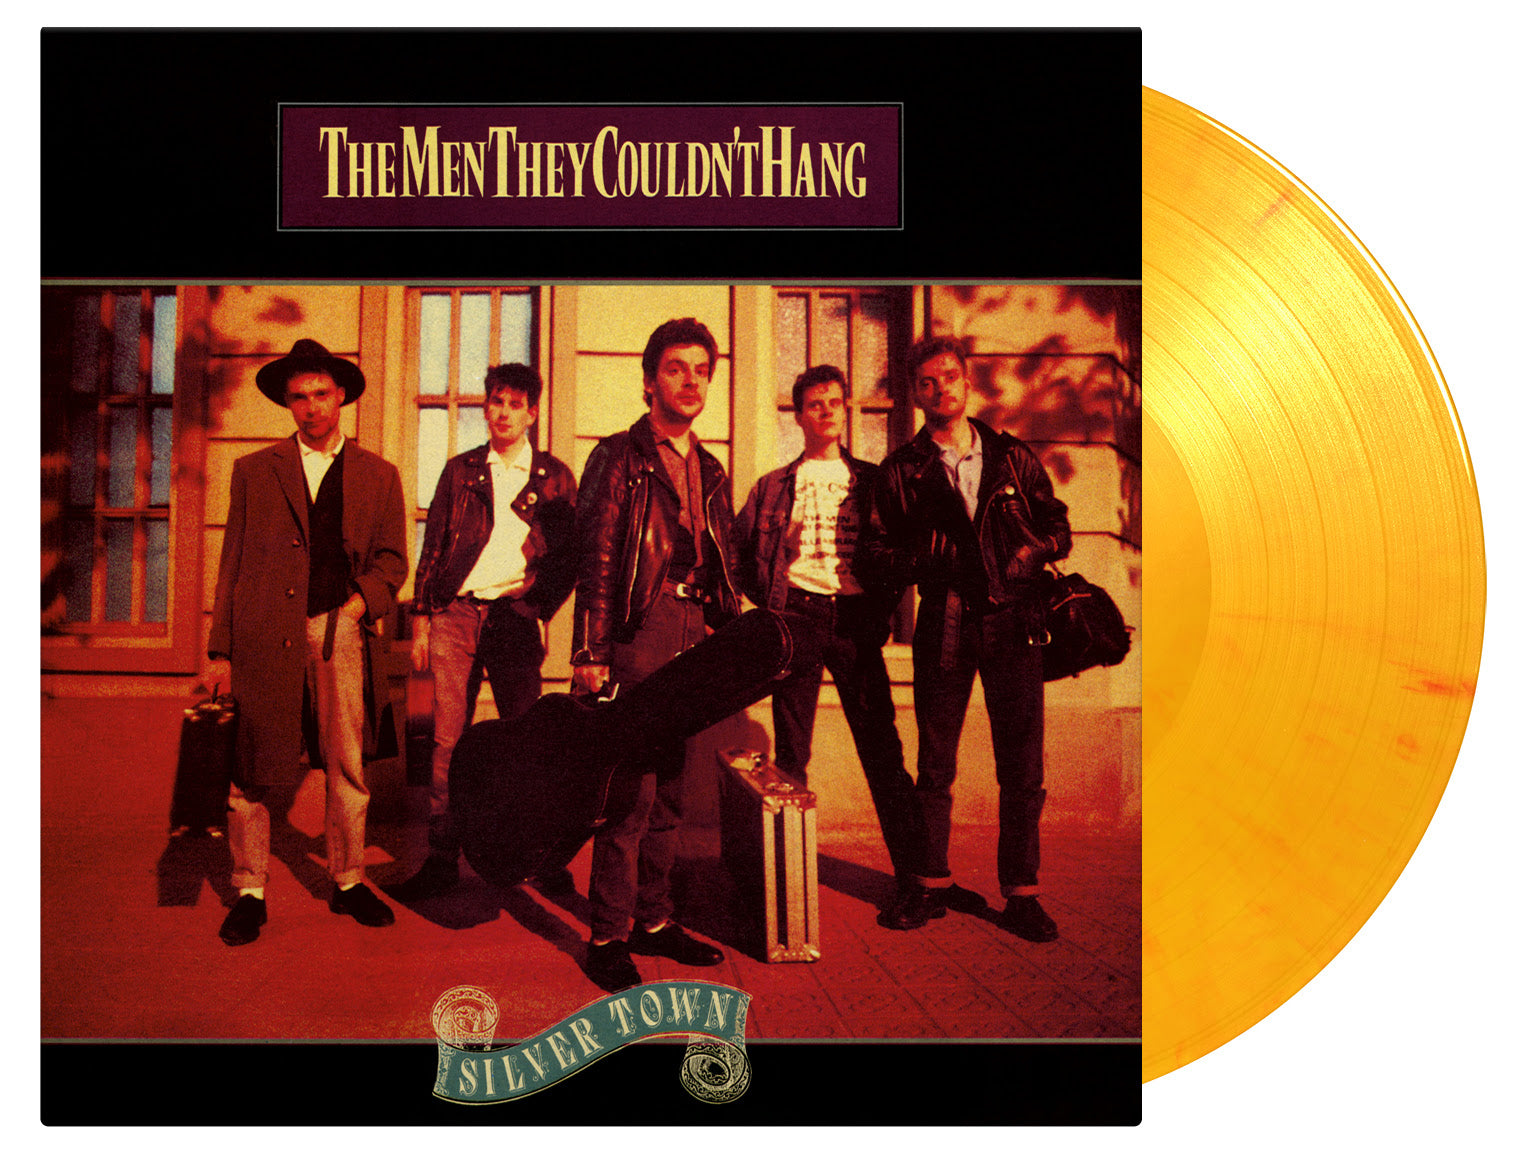 The Men They Couldn't Hang - Silver Town |  Vinyl LP | The Men They Couldn't Hang - Silver Town  (LP) | Records on Vinyl